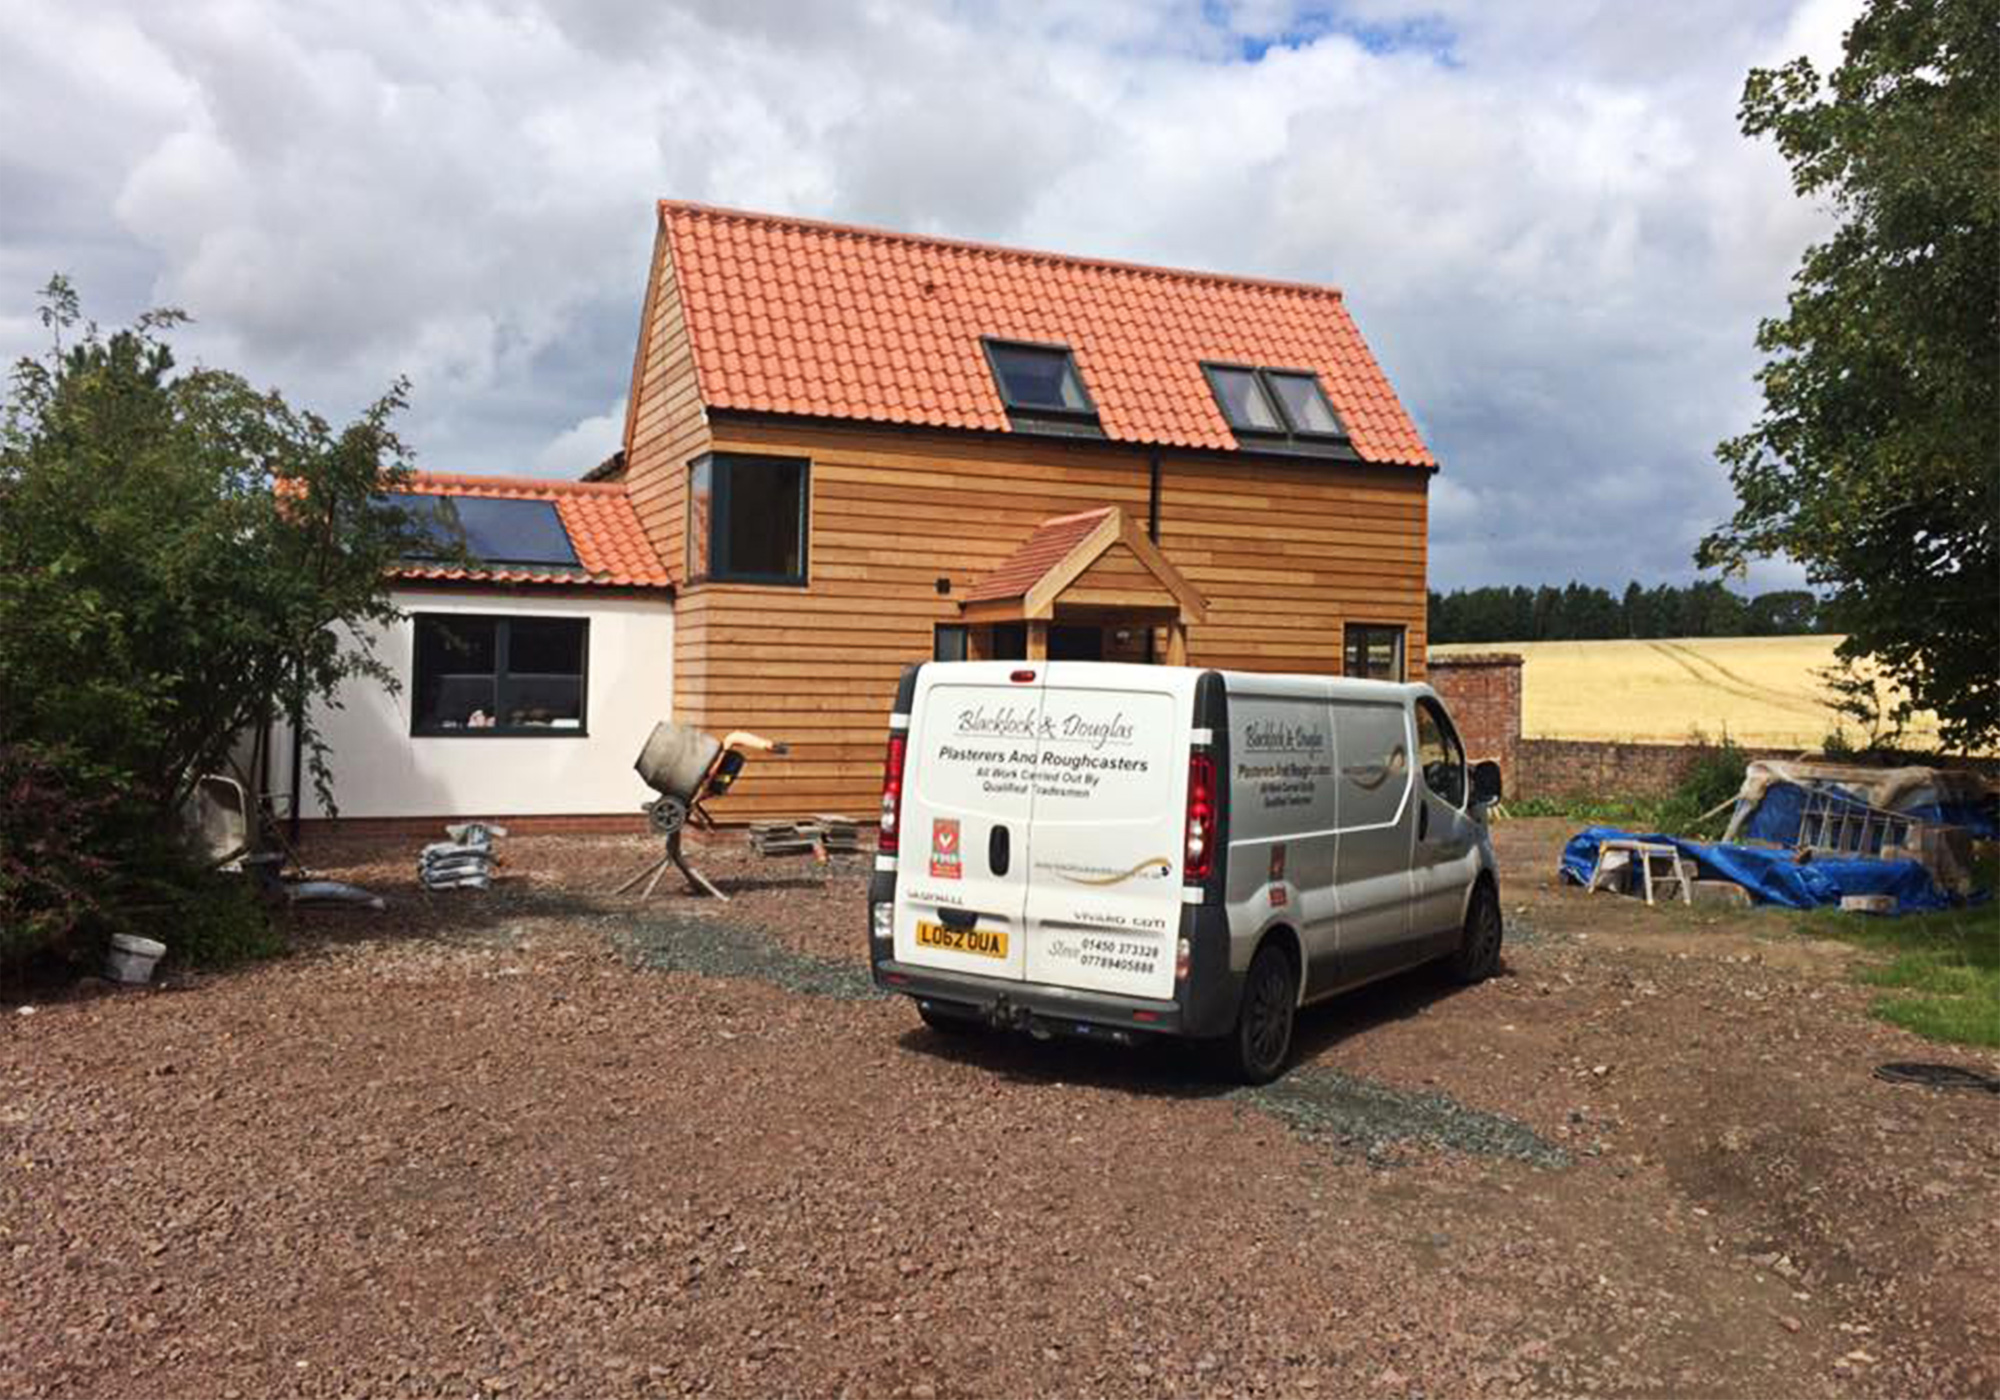 An image of our van sitting outside a house we plastered